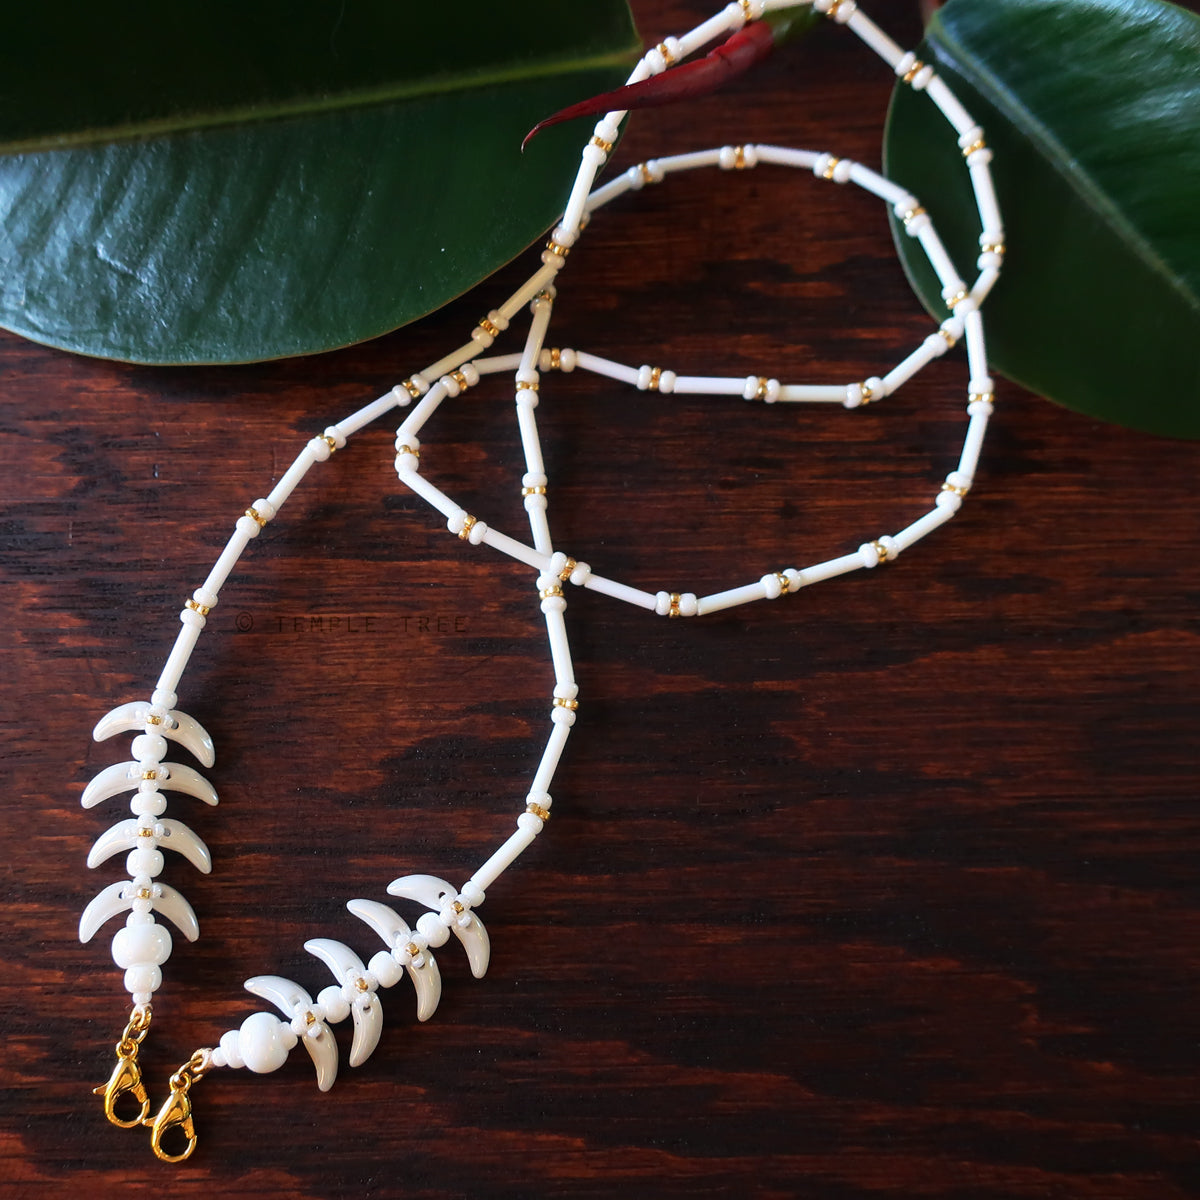 Temple Vine Beadwoven Bridal Mask Lanyard by Temple Tree - White and Gold